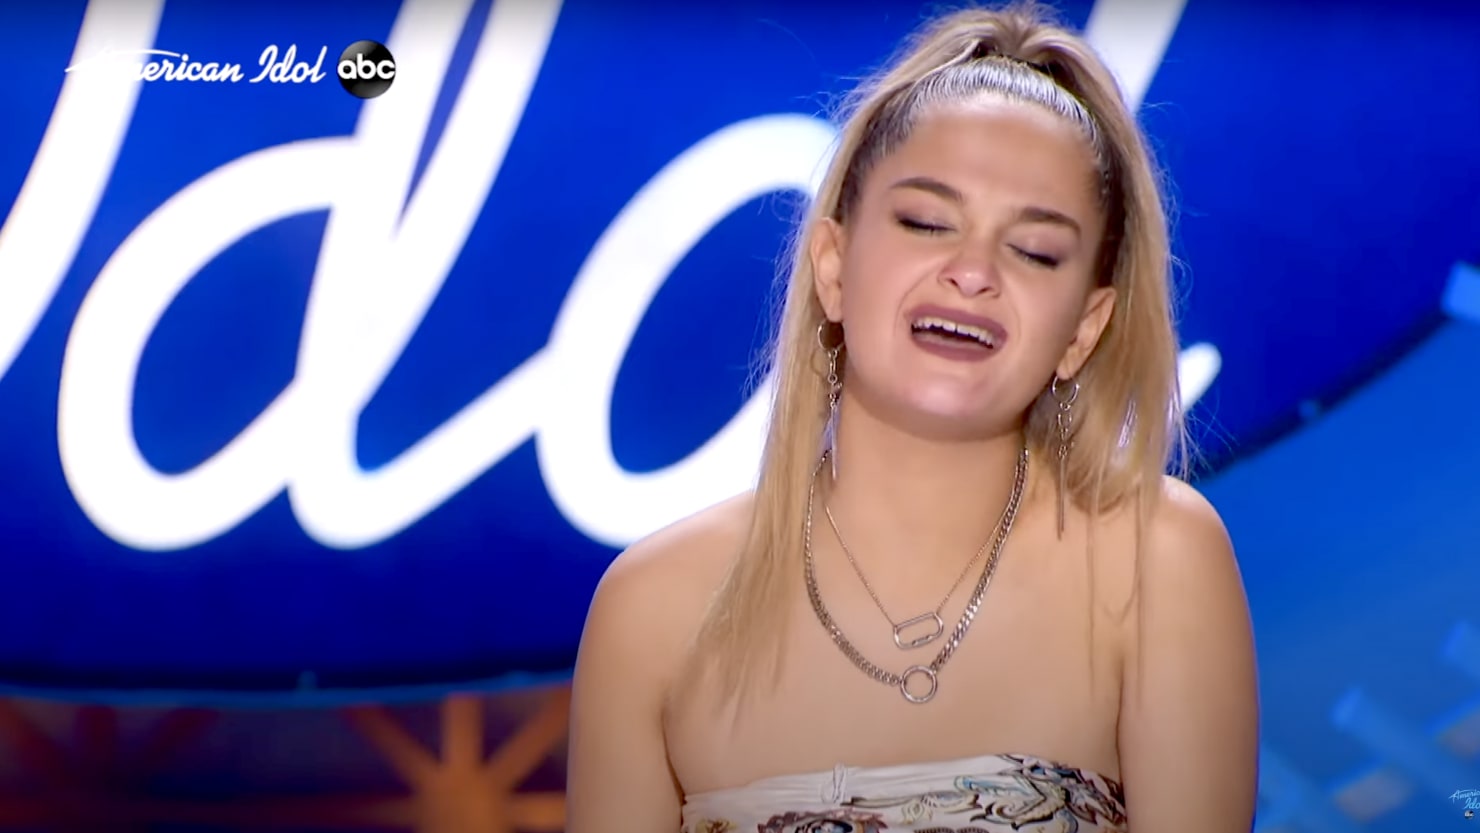 Claudia Conway goes to Hollywood, surprises ‘American Idol’ judges with Adele and emotional confession